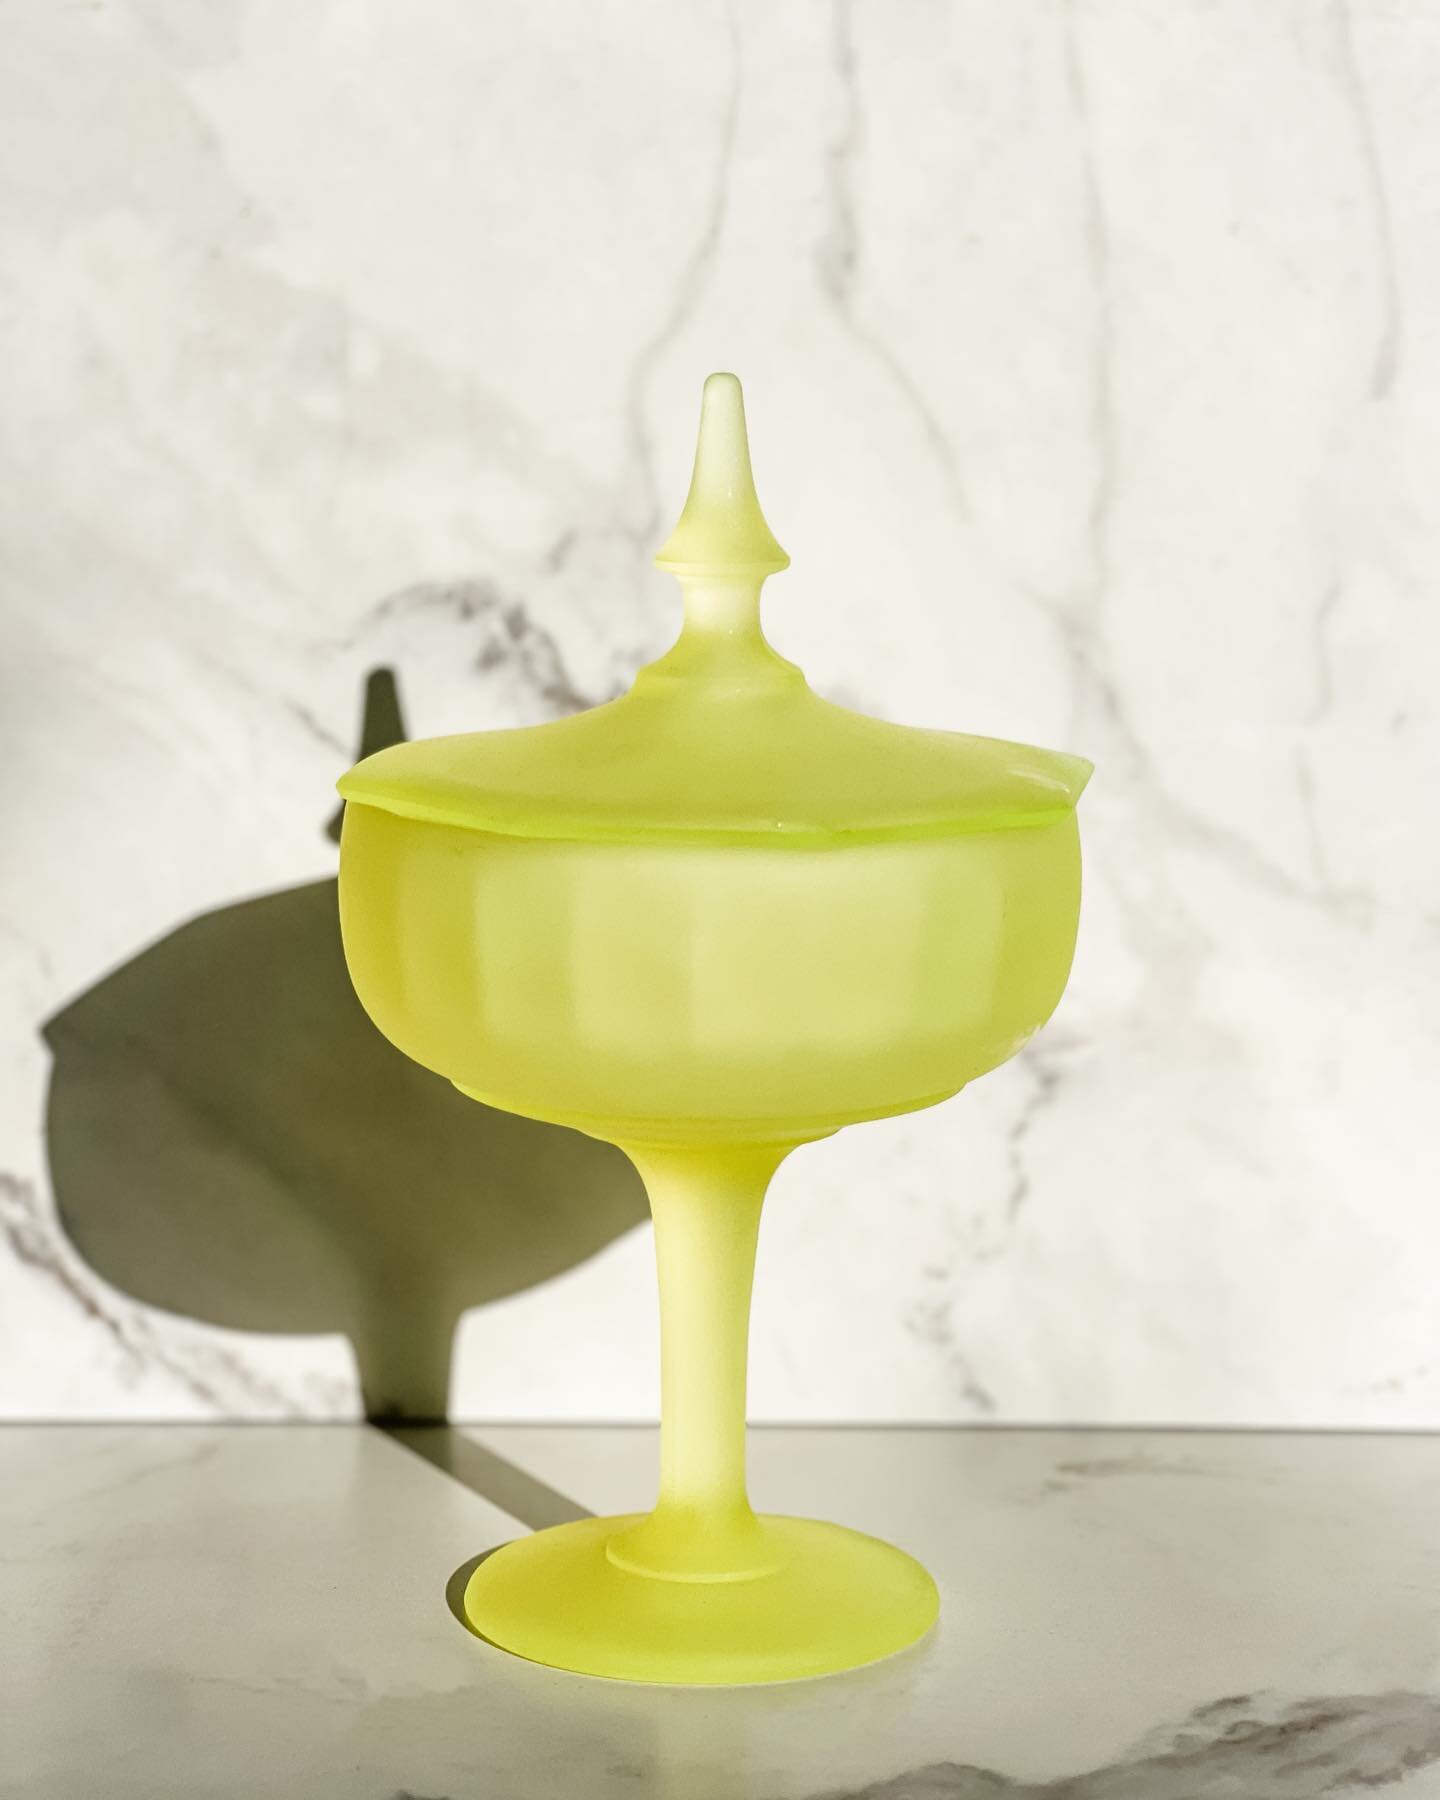 1930 Vaseline Satin Pedestal Dish by Toussant 

Available for custom order. In pristine condition. $215